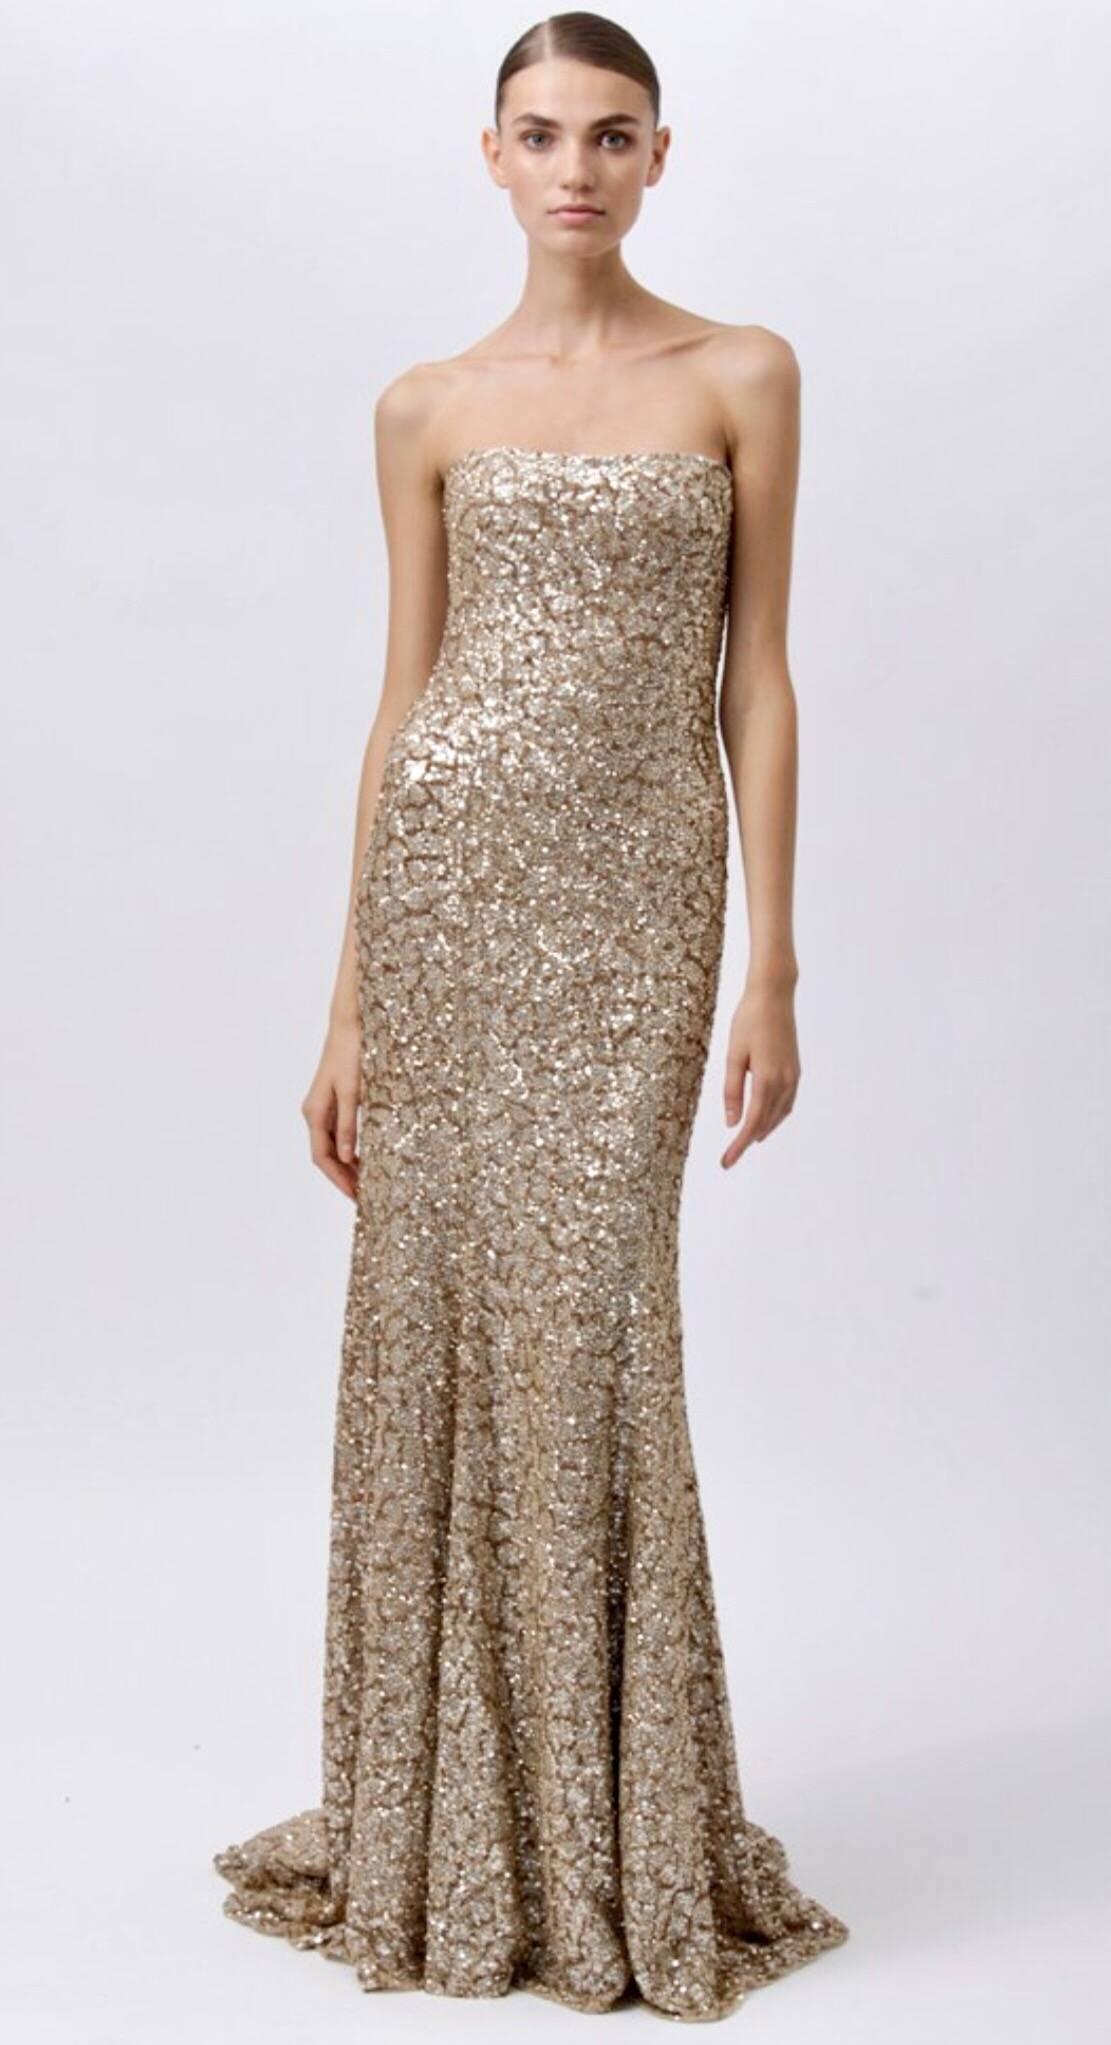 Monique Lhuillier Gorgeous Resort 2012 Gold Rose Gold Full Sequin Trained Gown  5